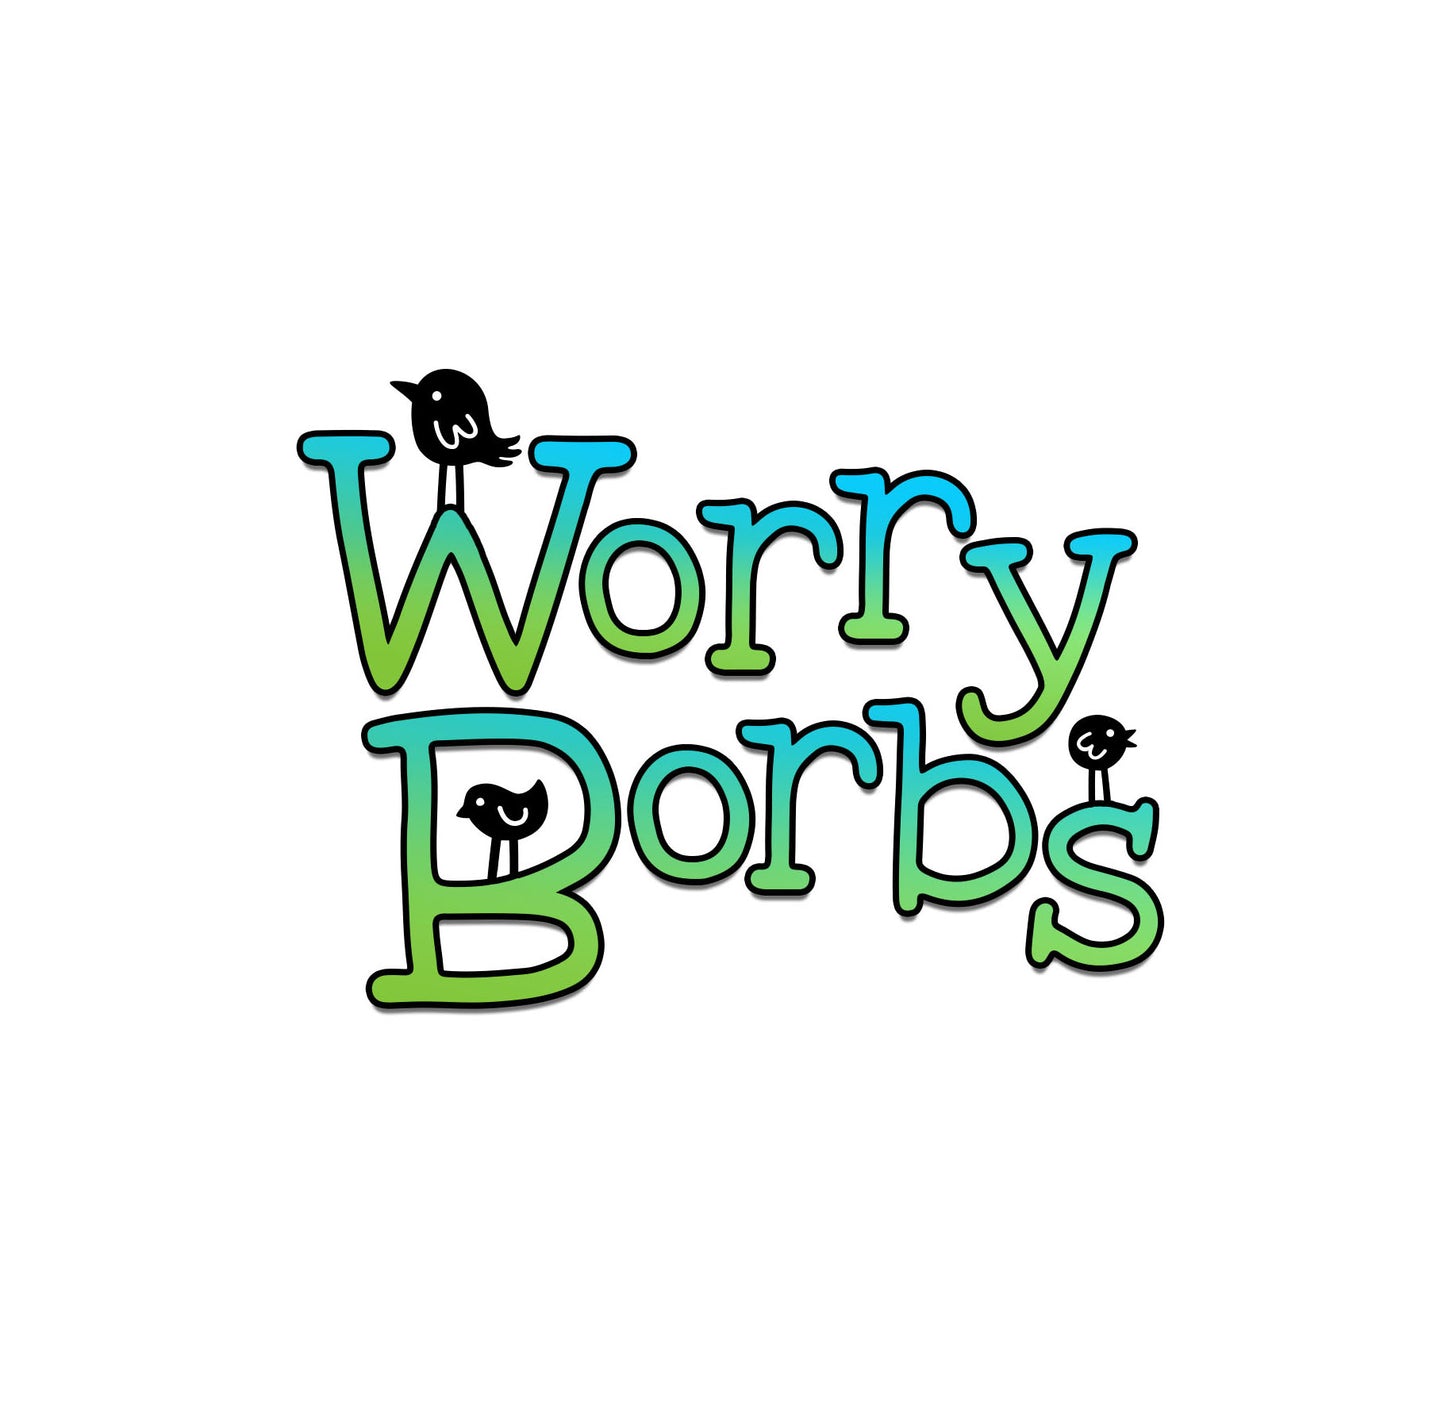 Belize the Worry Borb